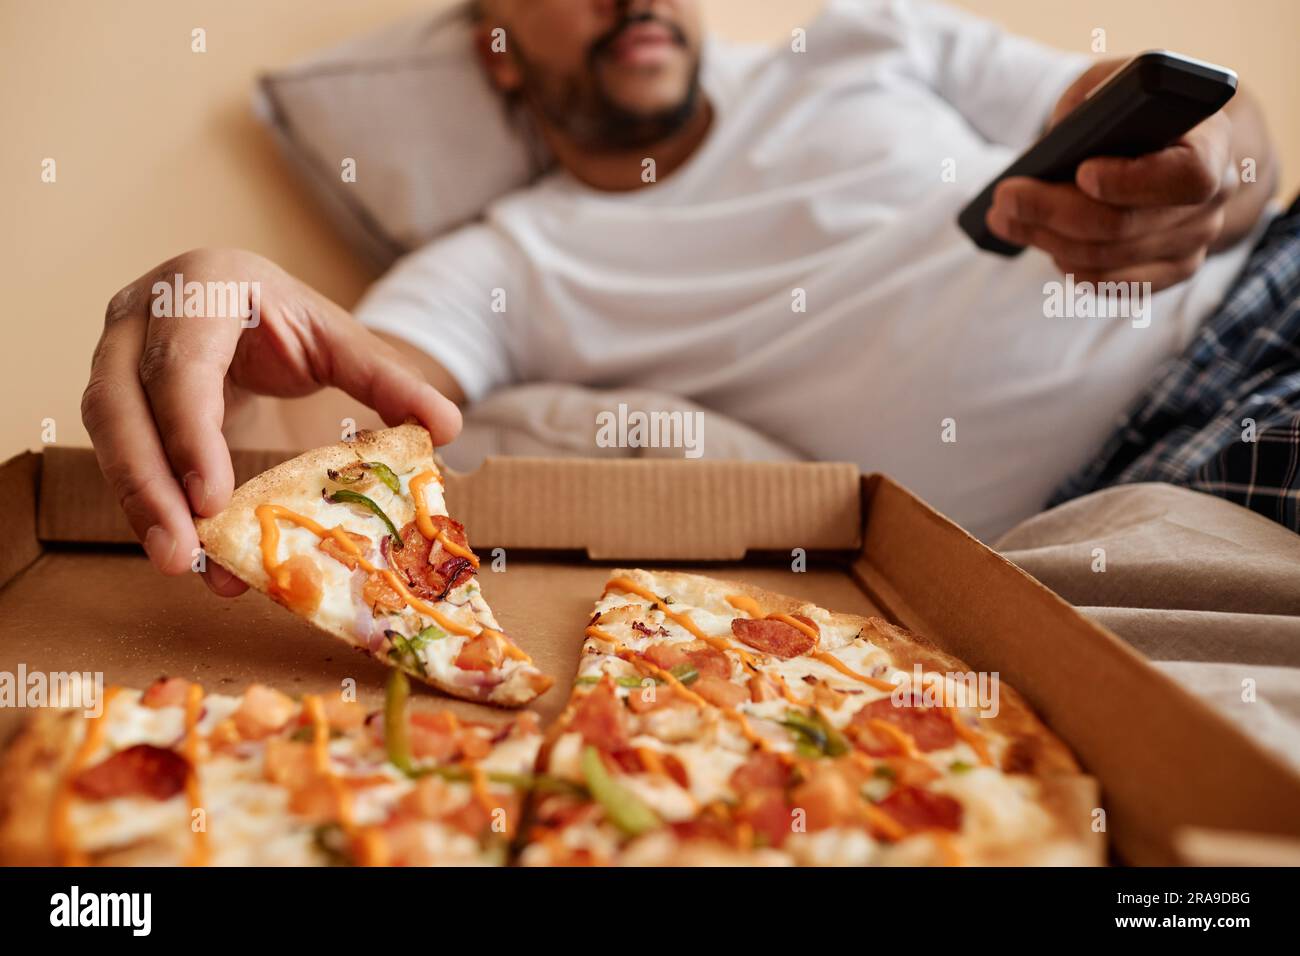 Closeup of adult man taking slice of pizza while enjoying lazy weekend at home and watching TV, copy space Stock Photo